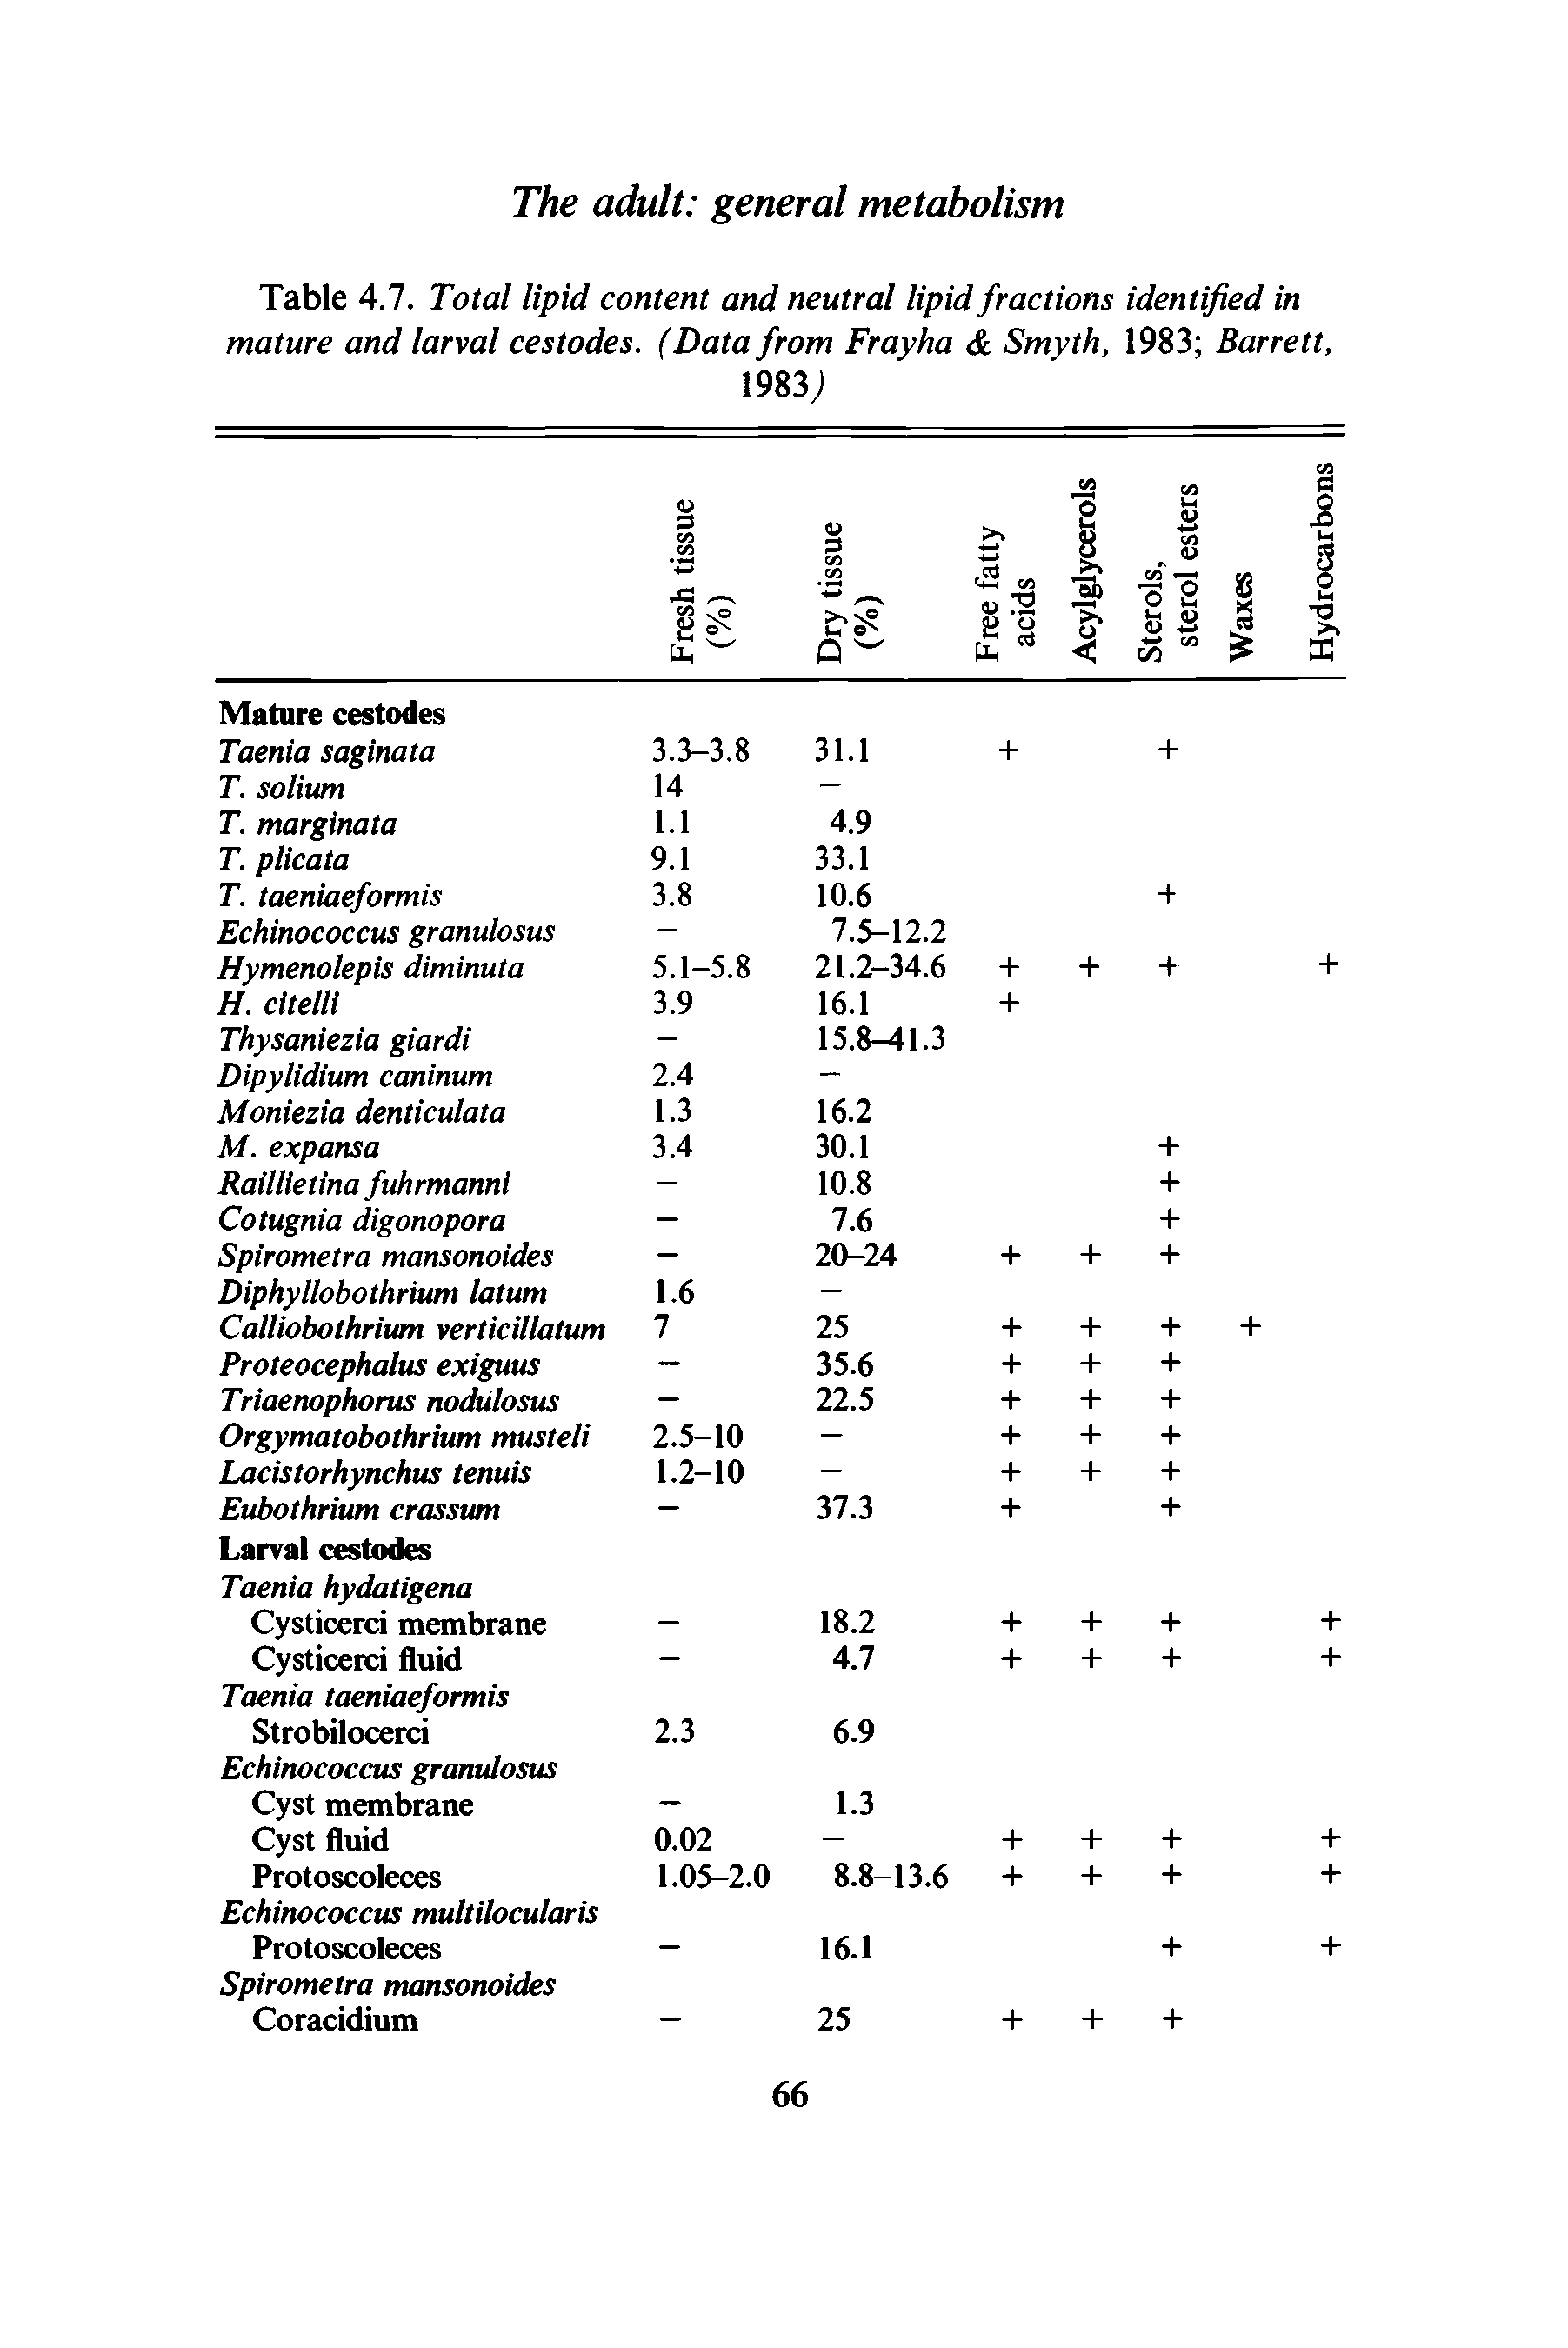 Table 4.7. Total lipid content and neutral lipid fractions identified in mature and larval cestodes. (Data from Frayha Smyth, 1983 Barrett,...